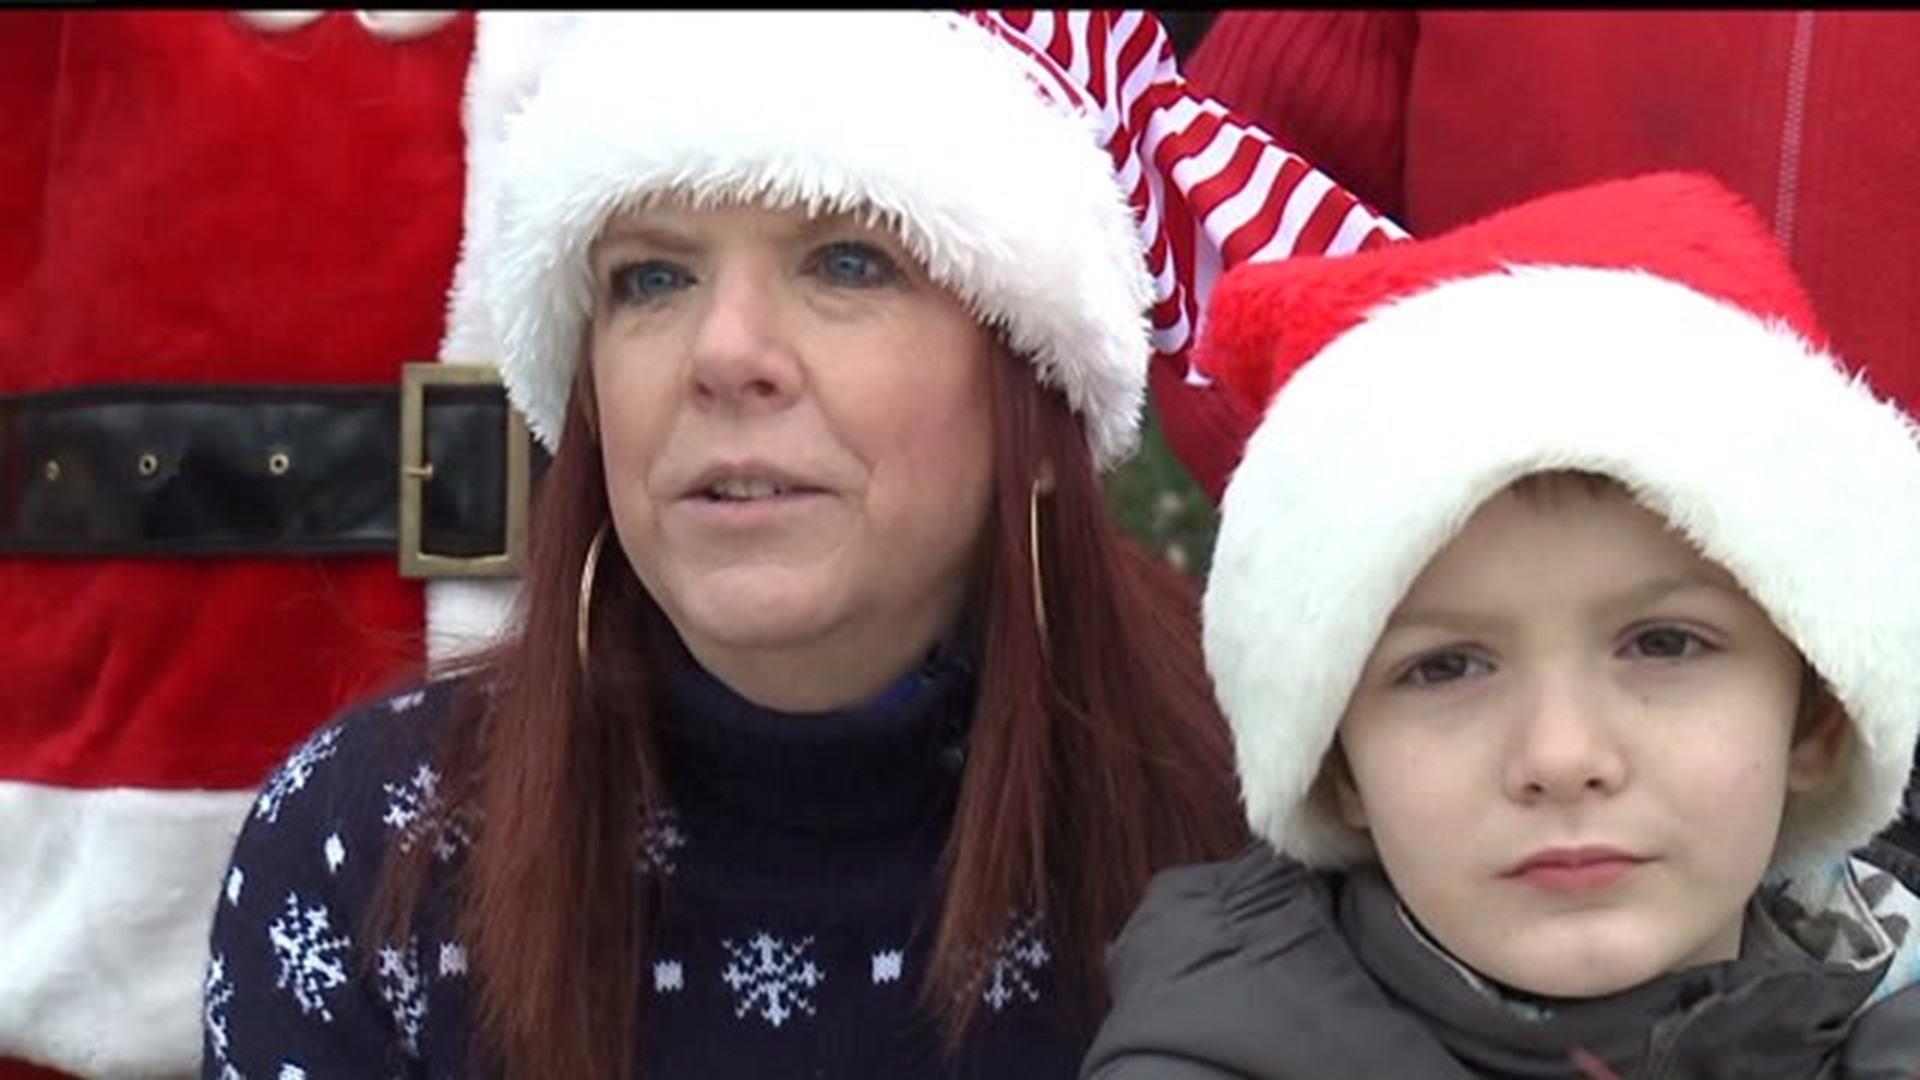 Lancaster County non-profit helps families in need this holiday season